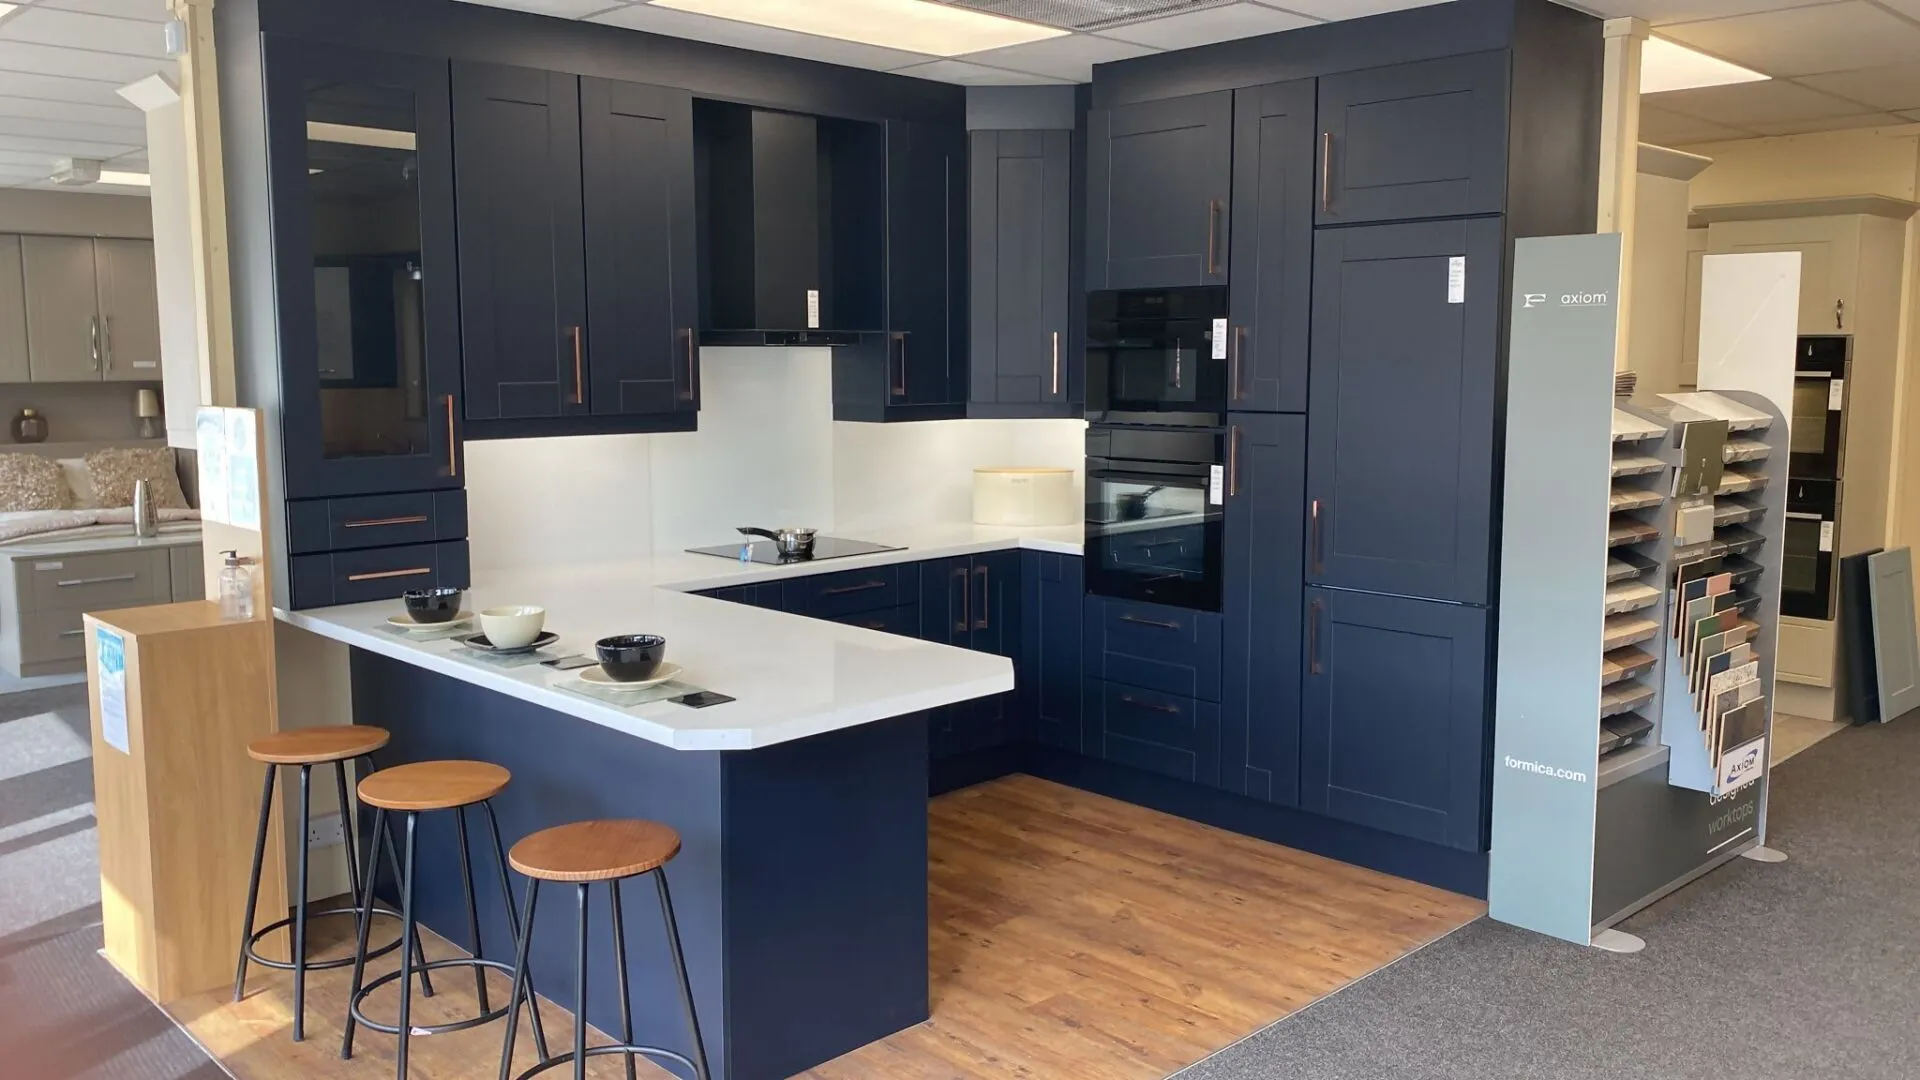 showroom display of a navy blue kitchen